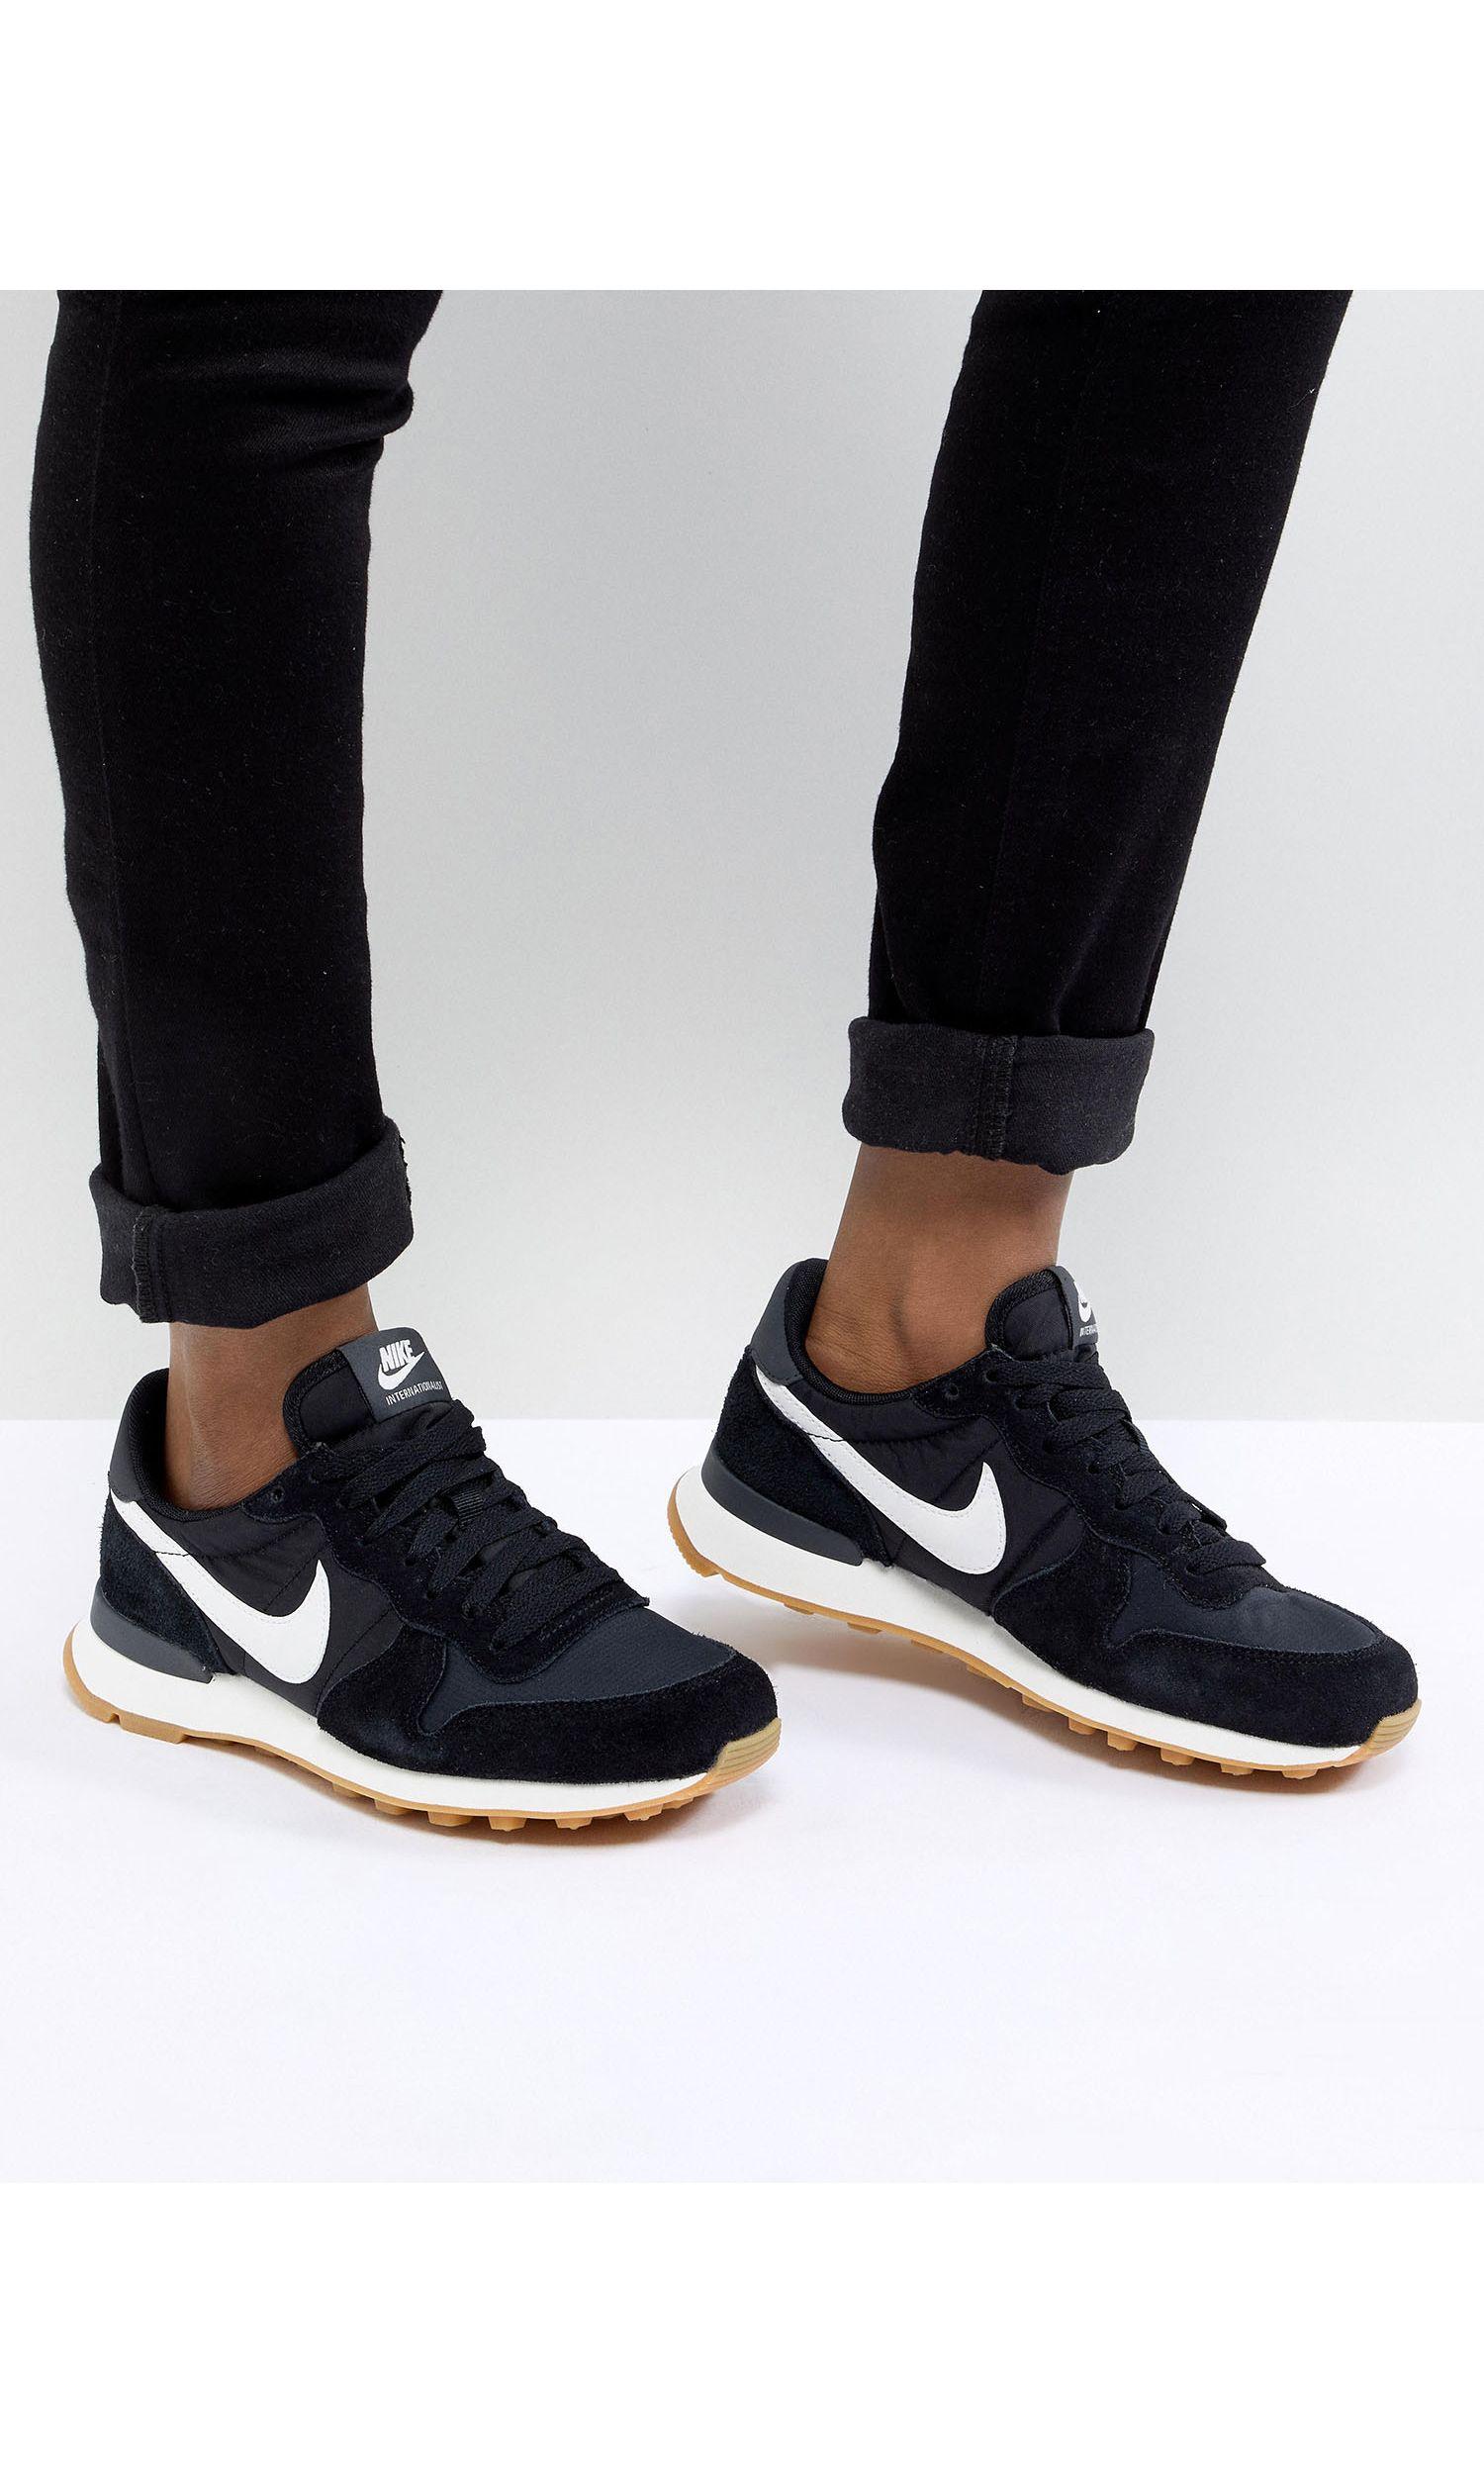 Nike Internationalist Competition Running Shoes in Black |